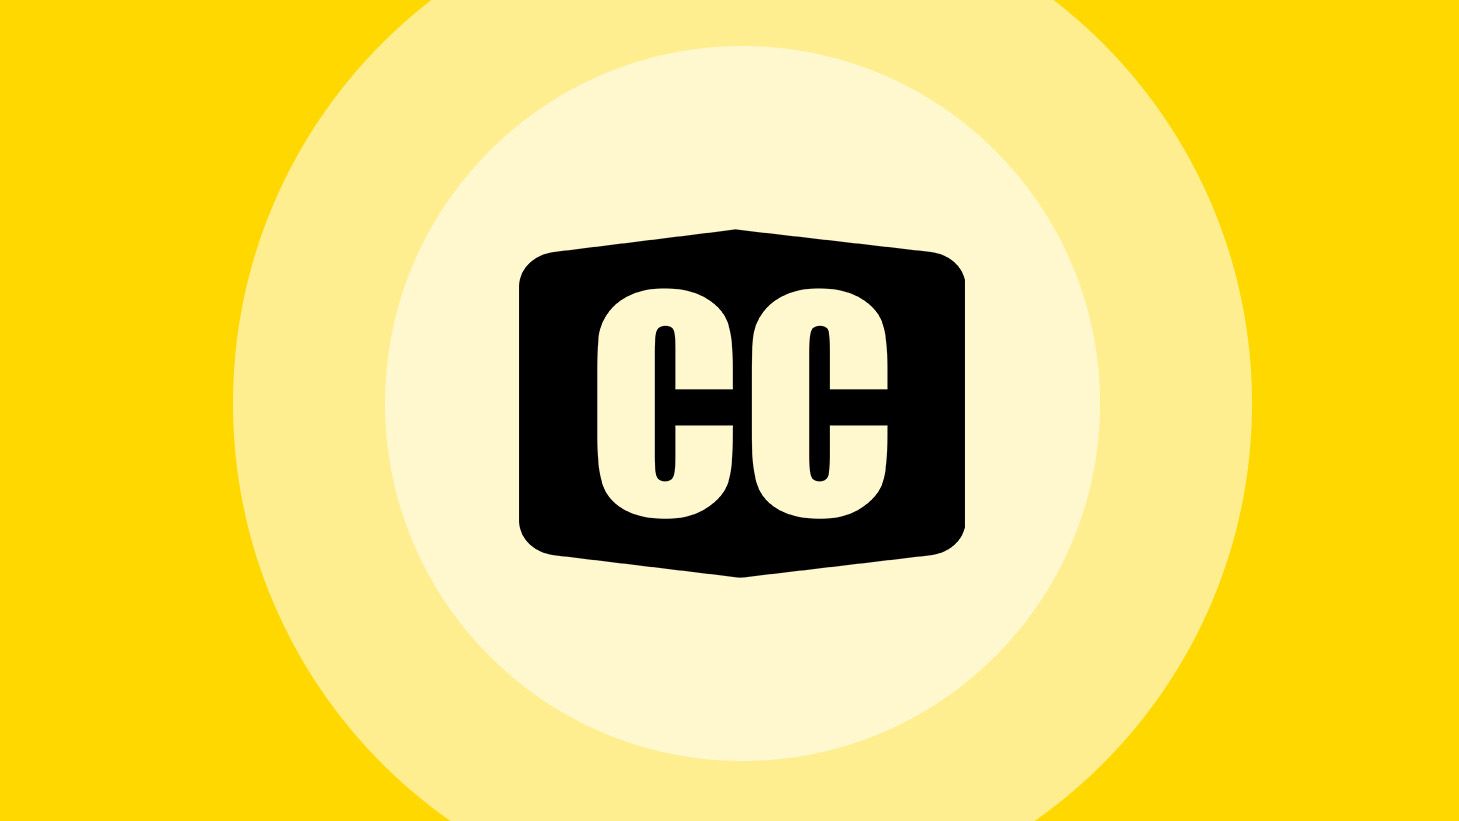 Closed Caption icon placed on a yellow background